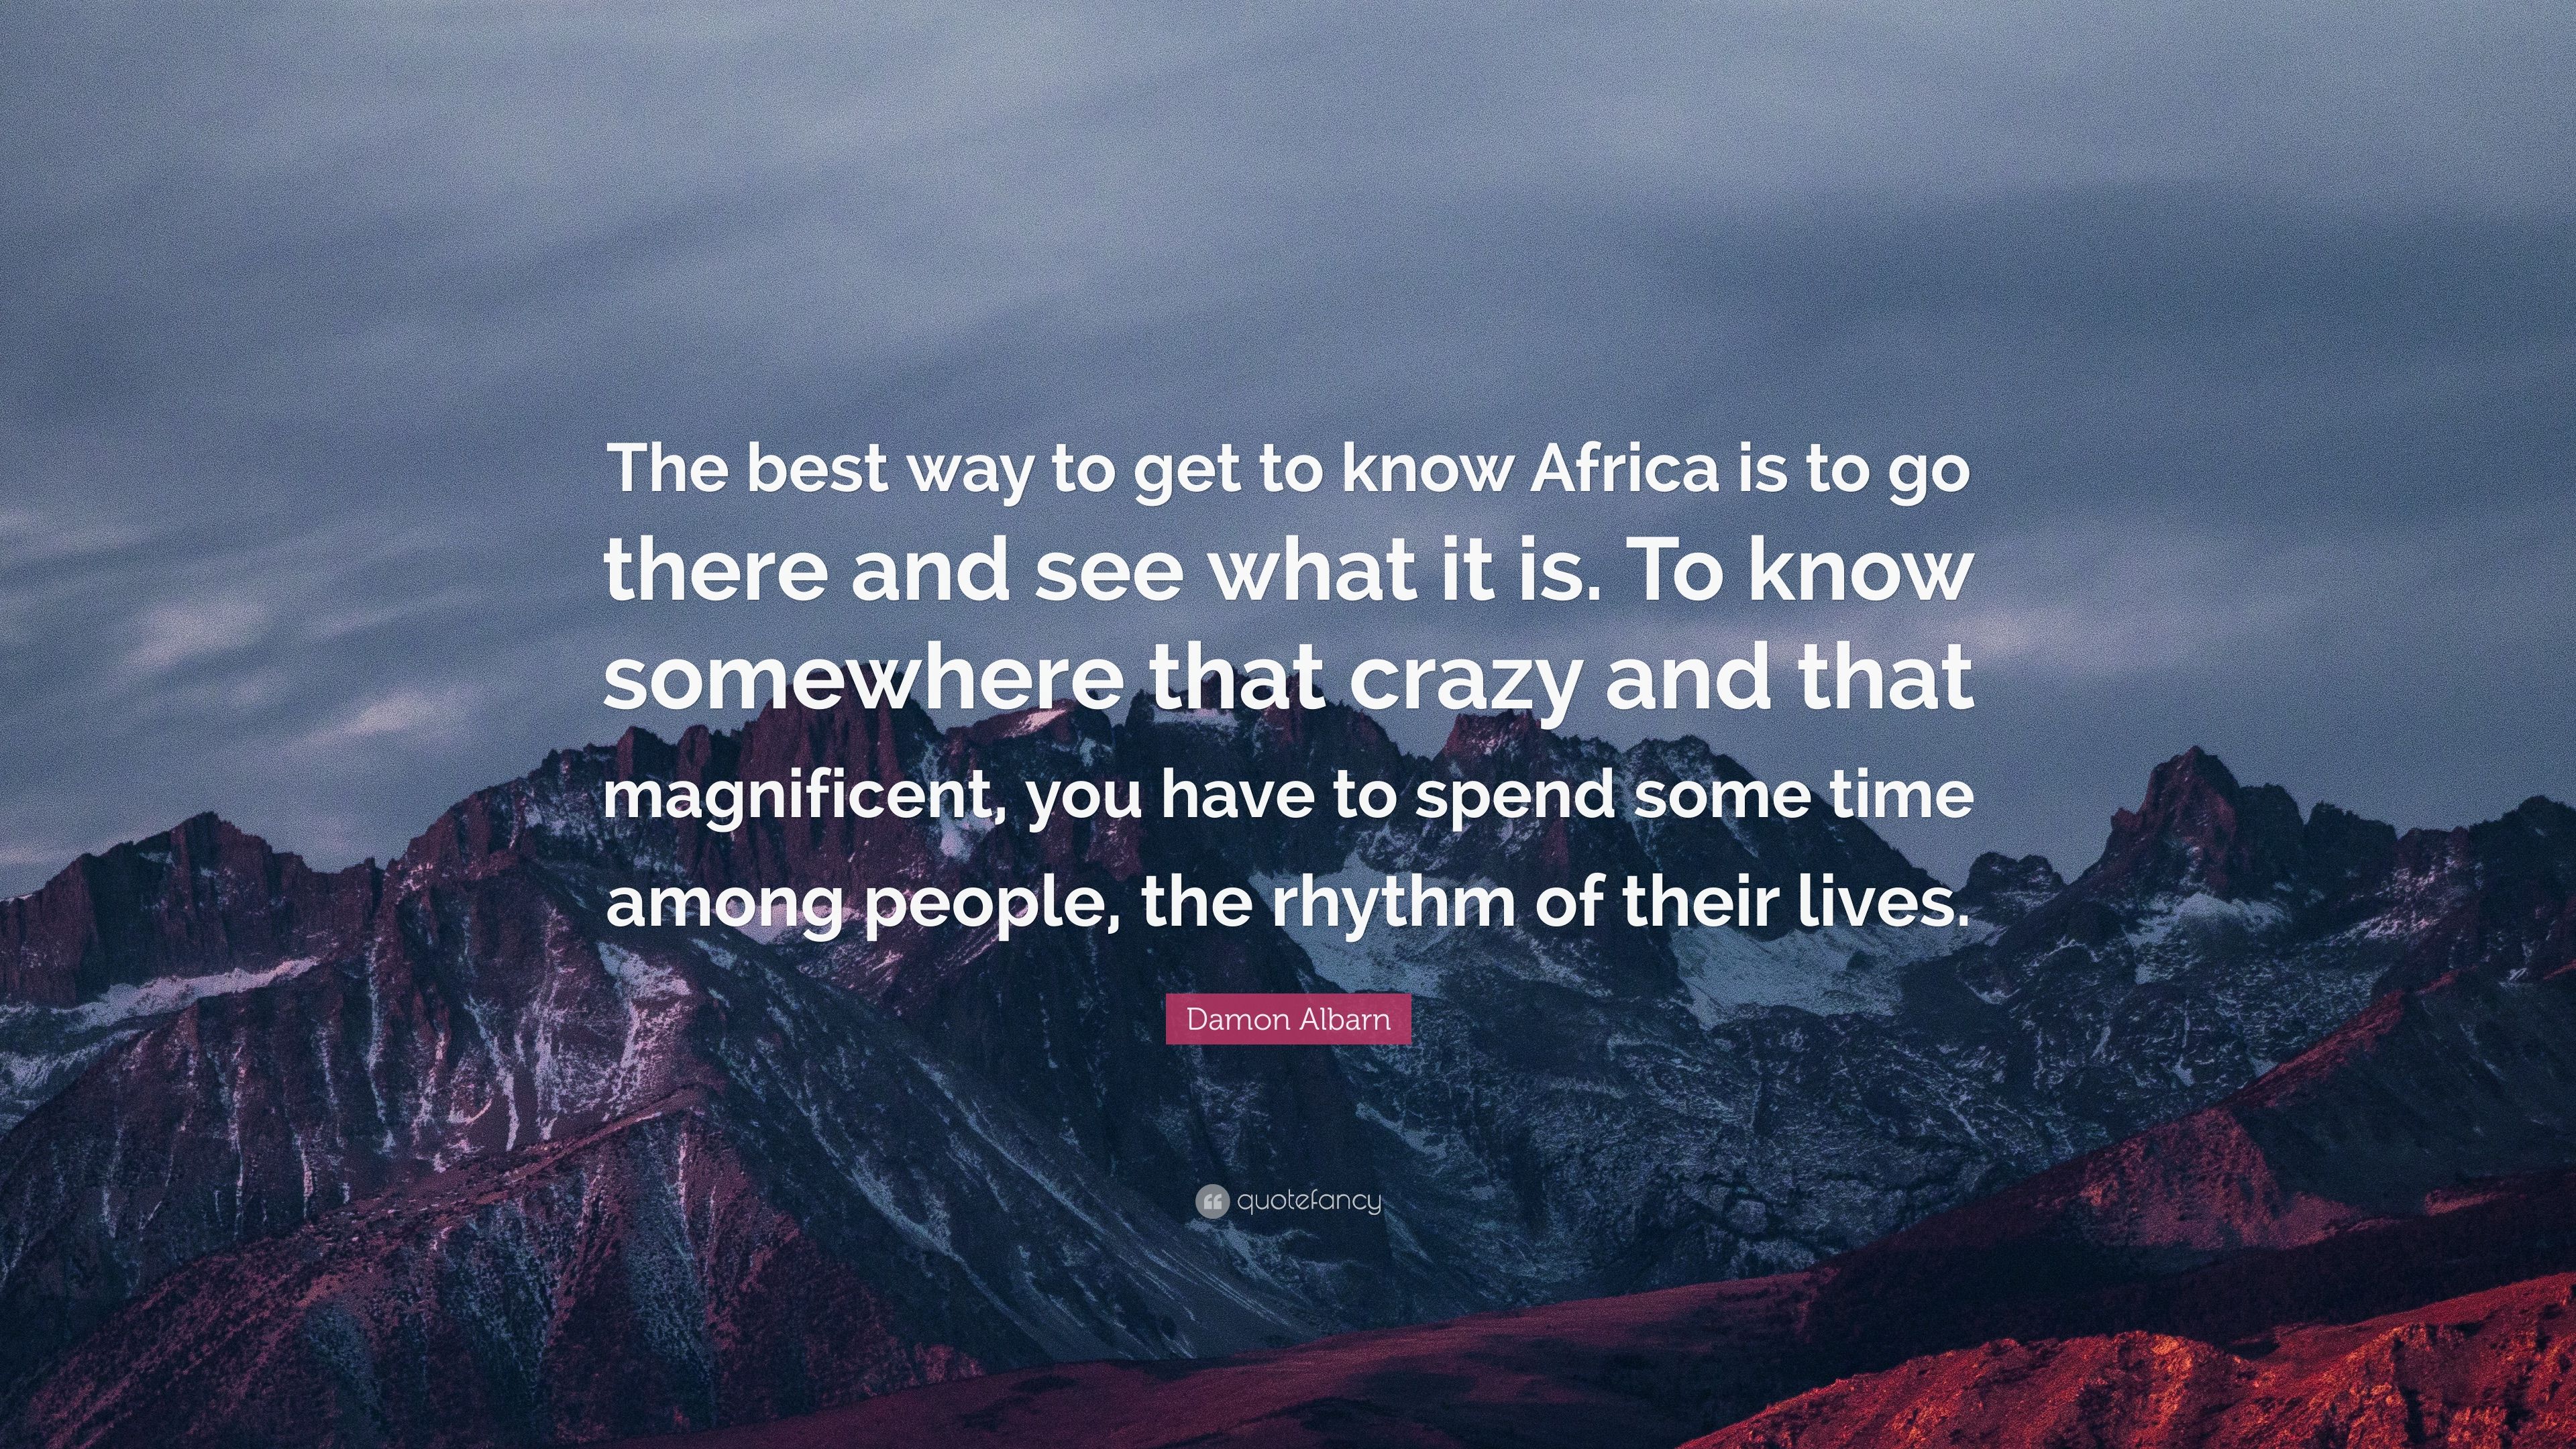 Damon Albarn Quote: “The best way to get to know Africa is to go